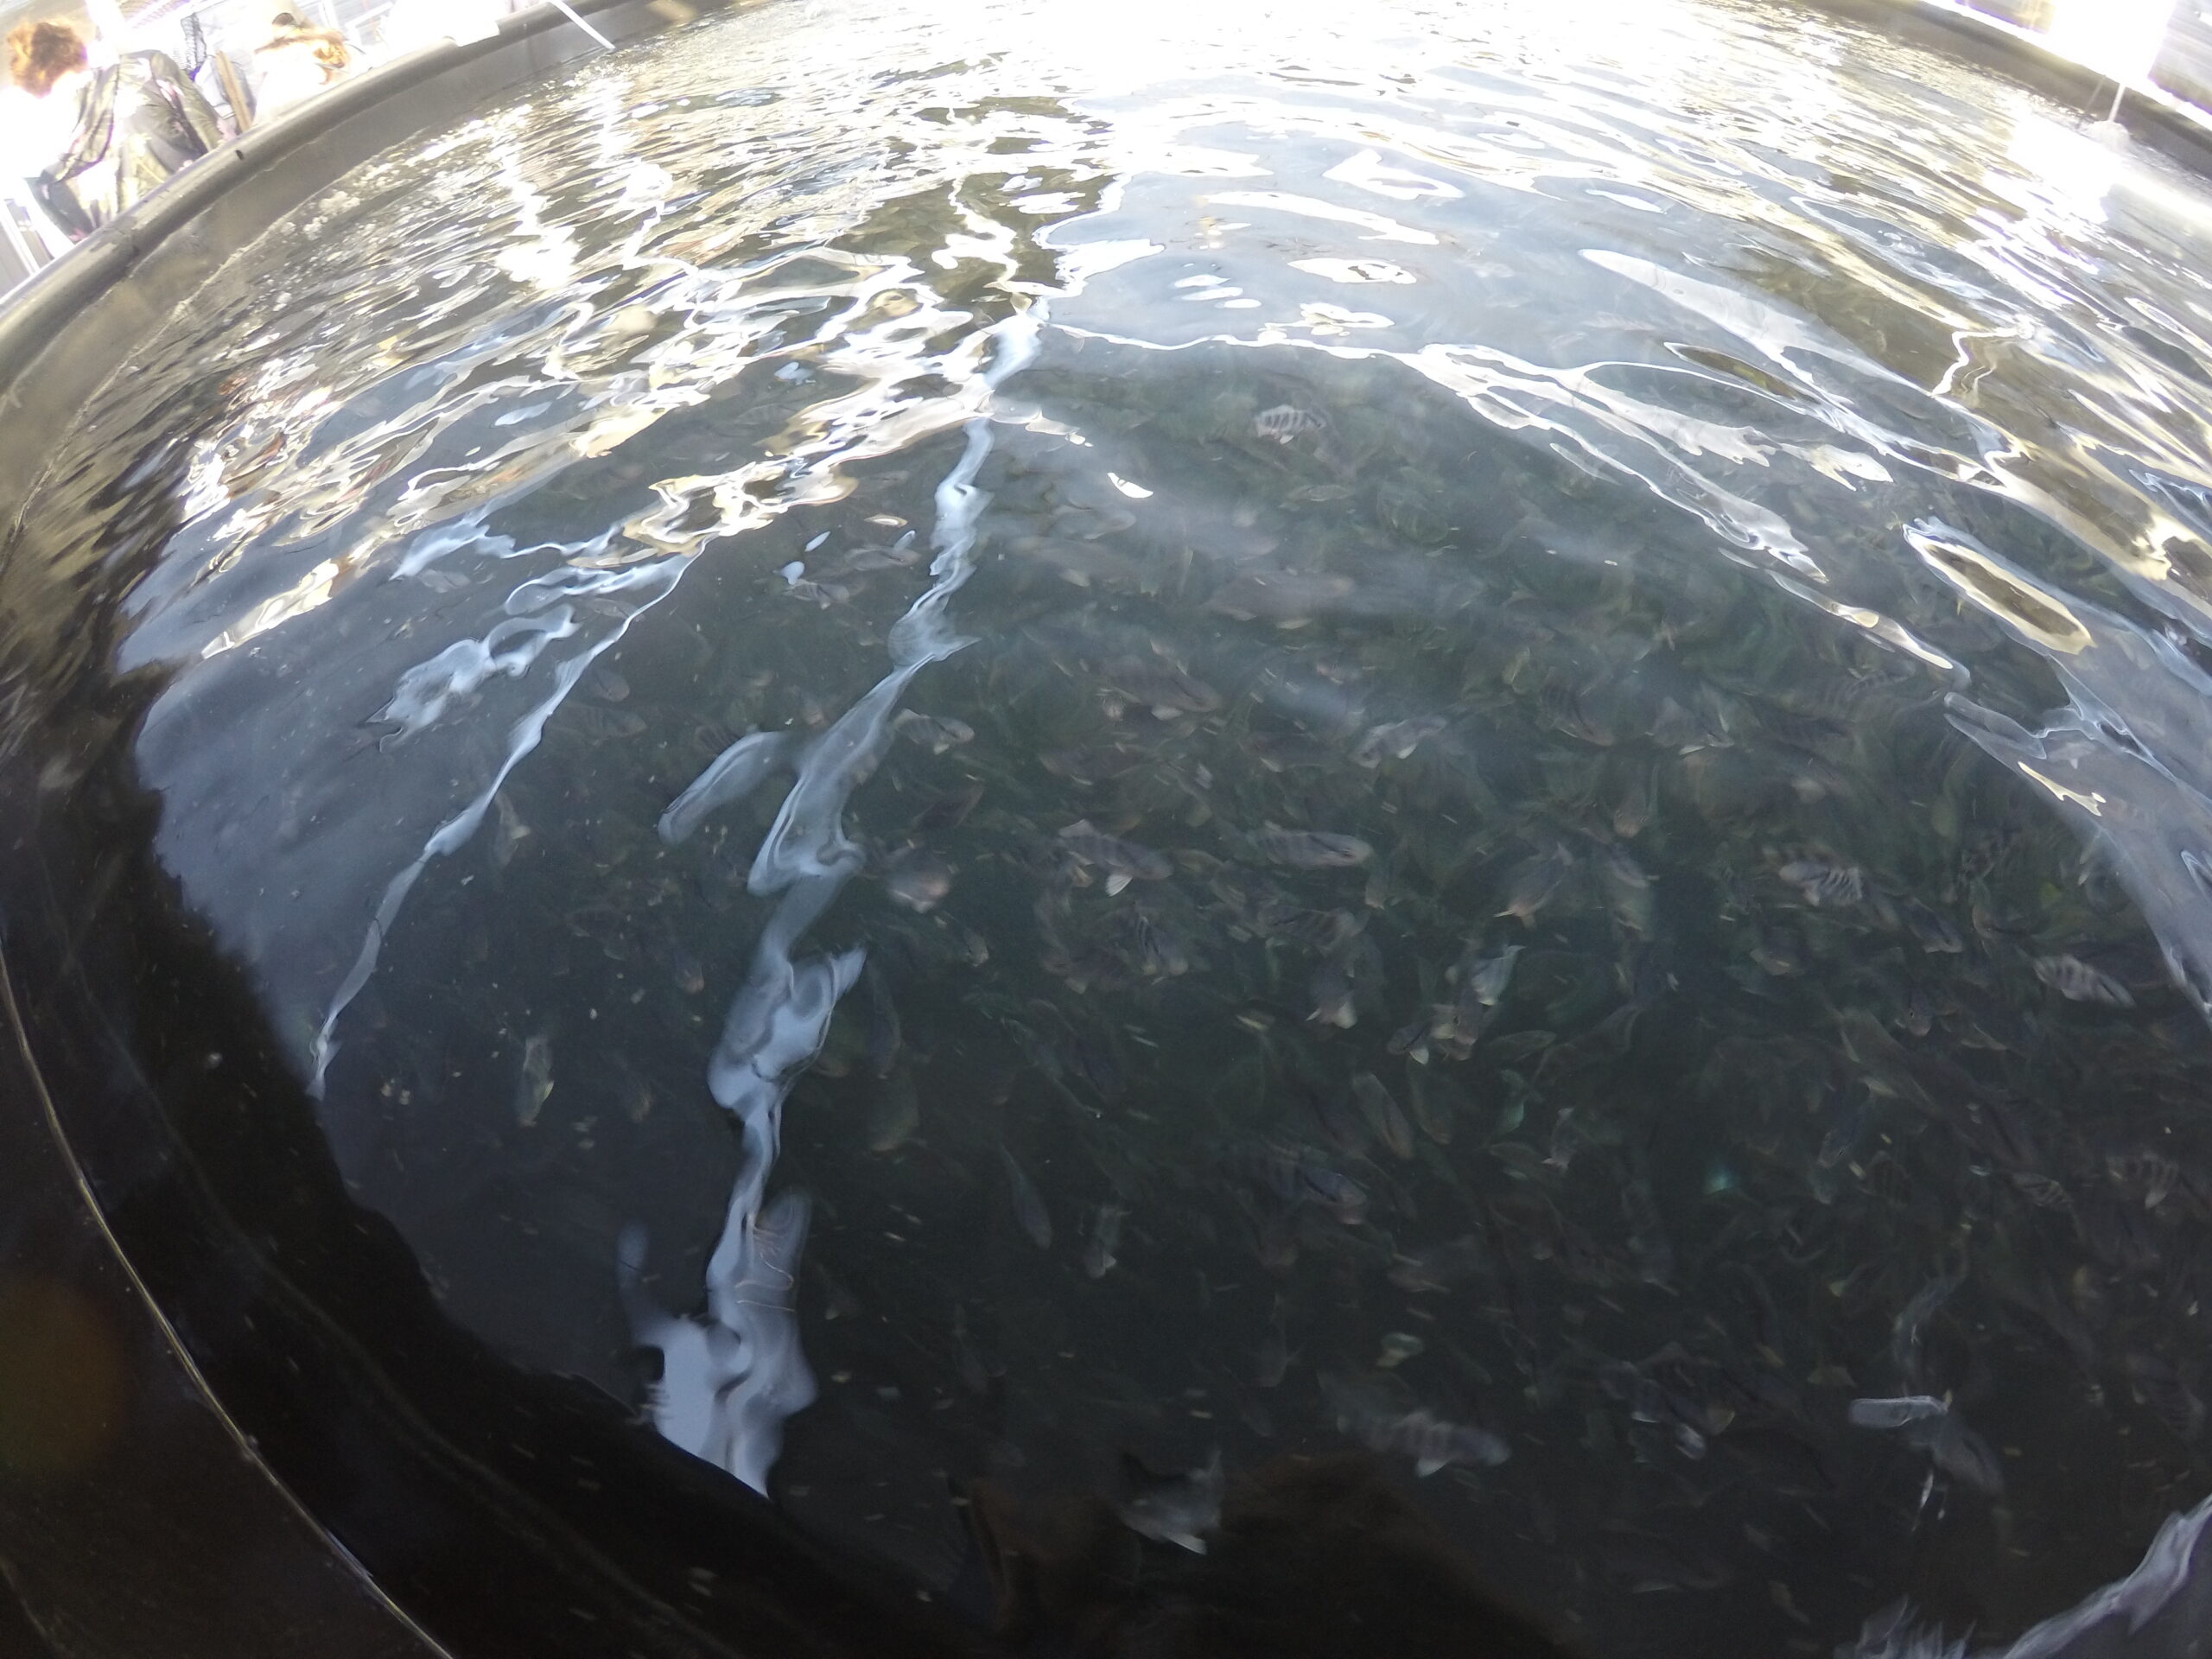 A tank full of juvenile kampachi fish, viewed from above